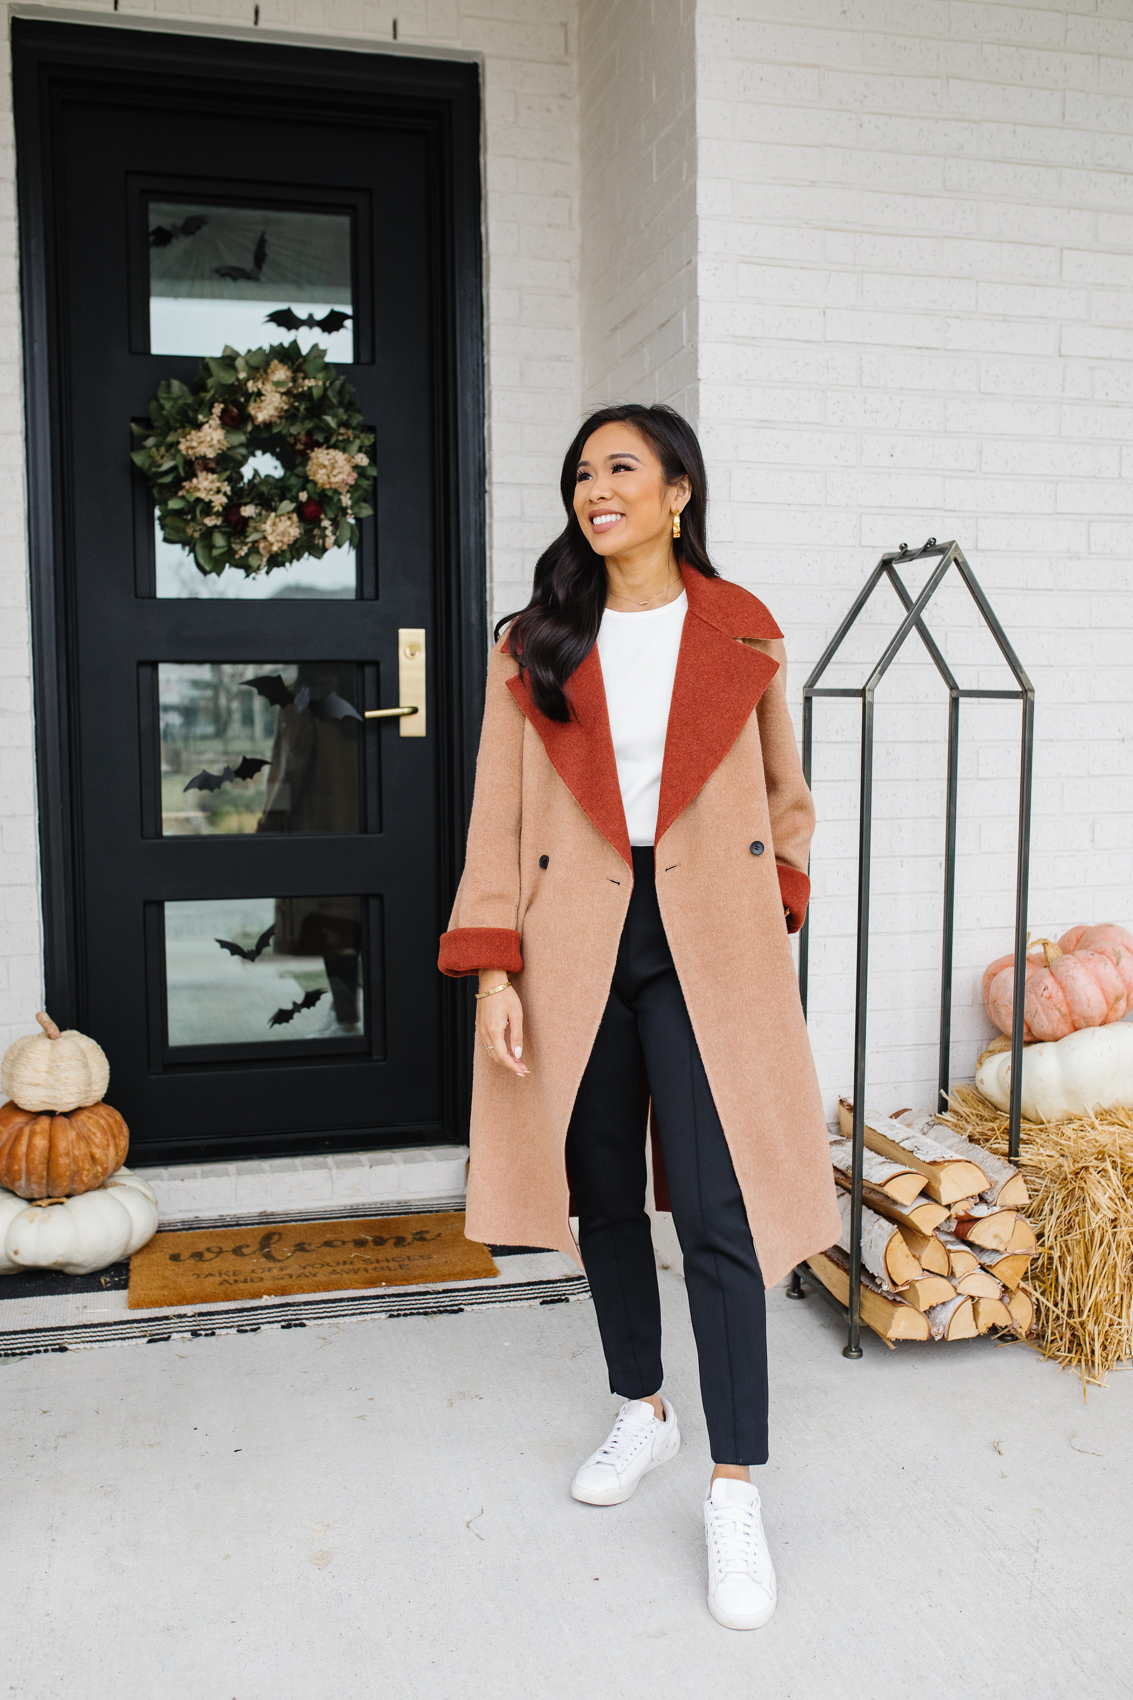 Blogger Hoang-Kim wears a camel coat made of wool by M.M.LaFleur with black pants, white sneakers and a white top in front of her fall front porch